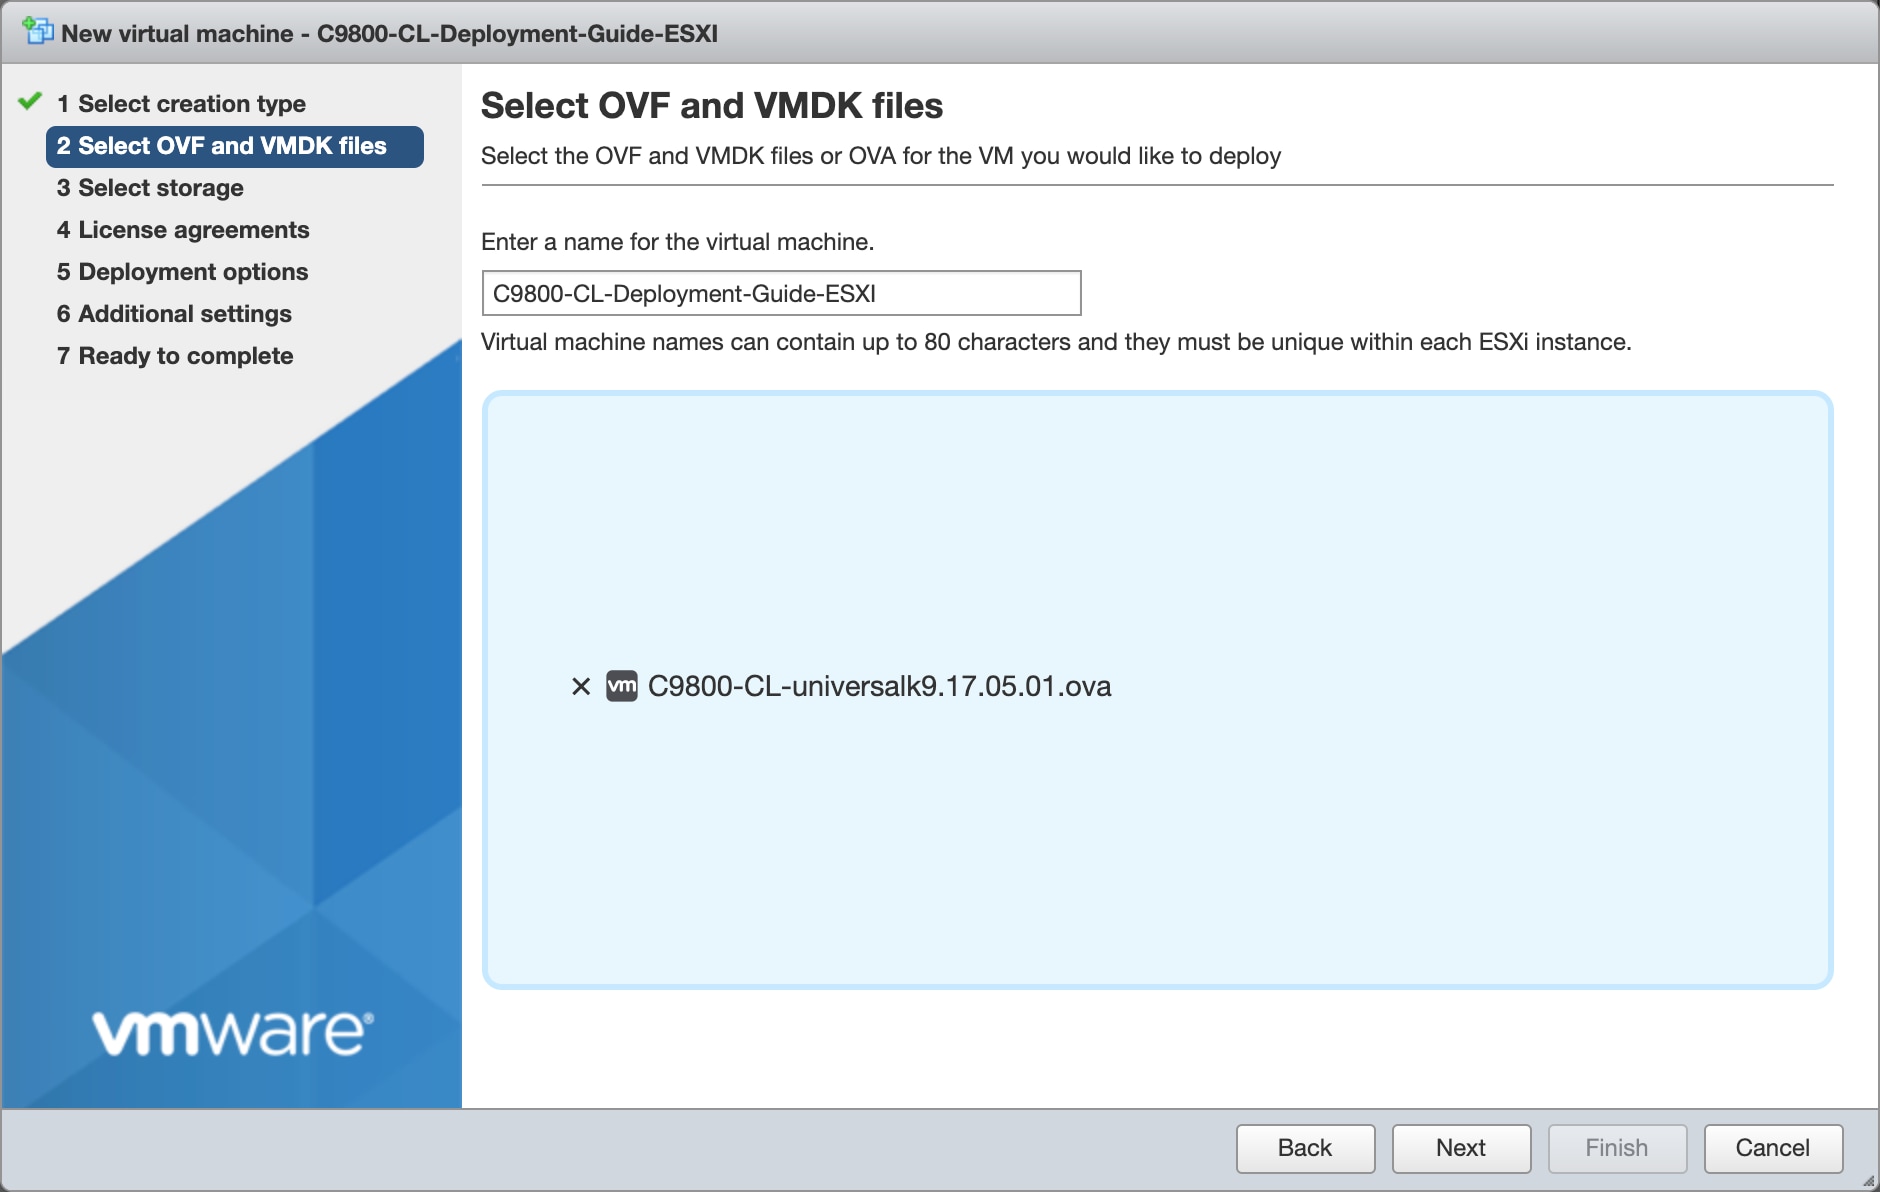 Enter a name for the 9800-CL VM and select the OVA file that will be deployed